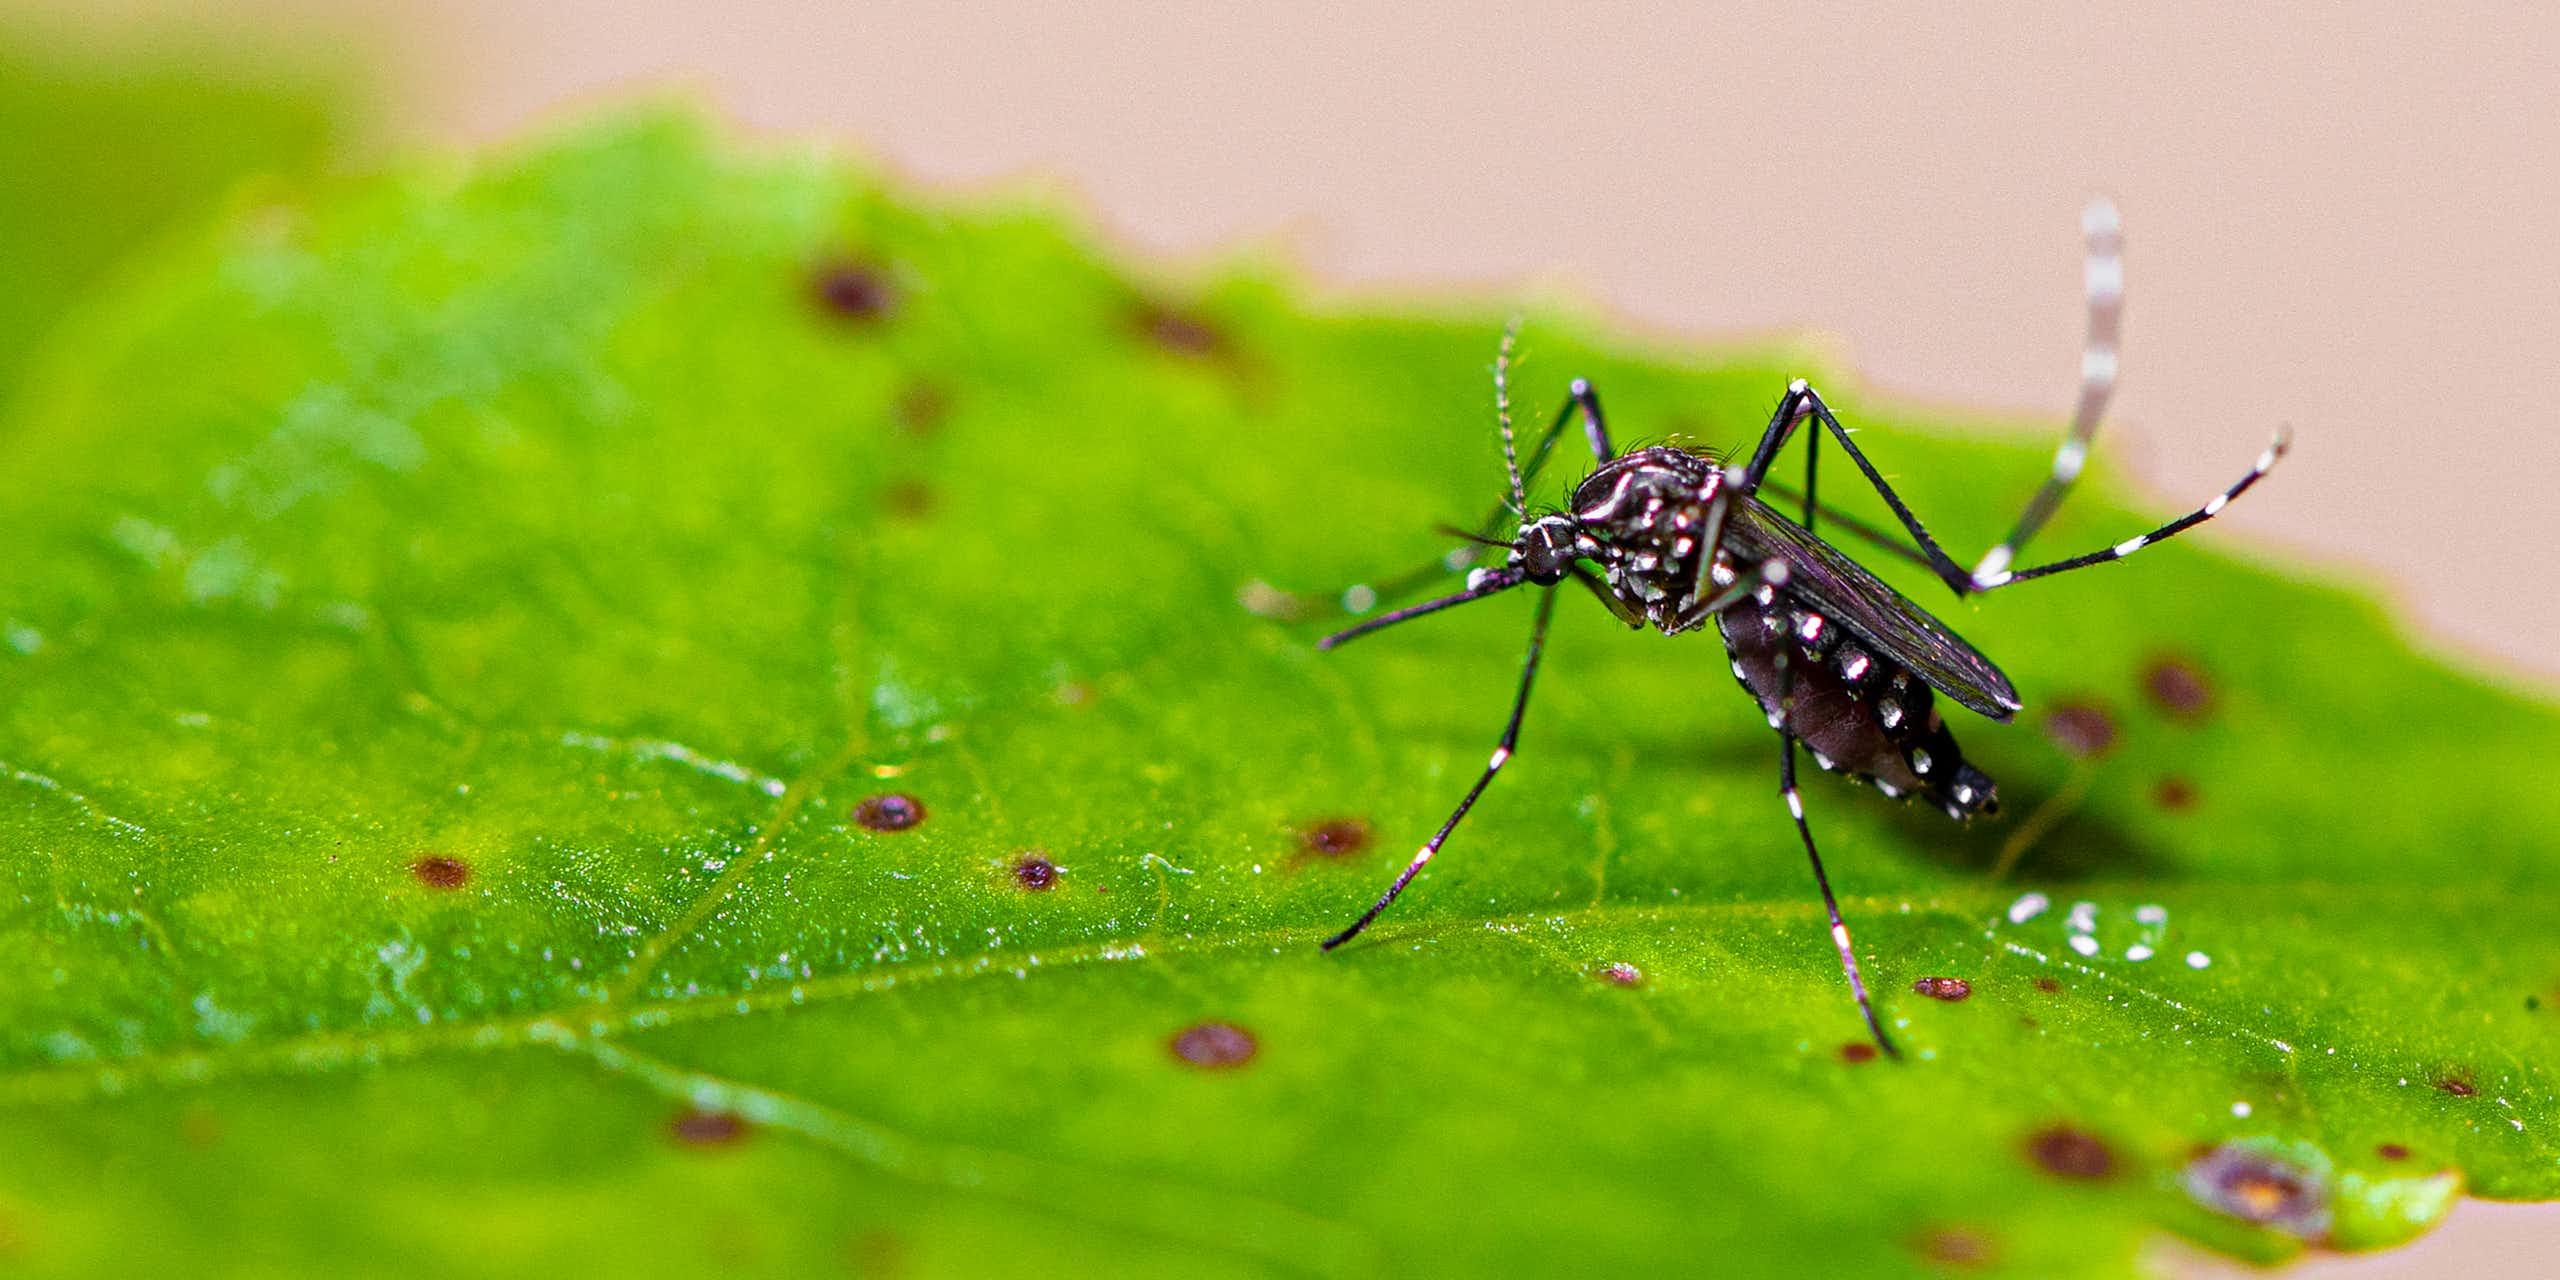 A spotted mosquito on a green leaf